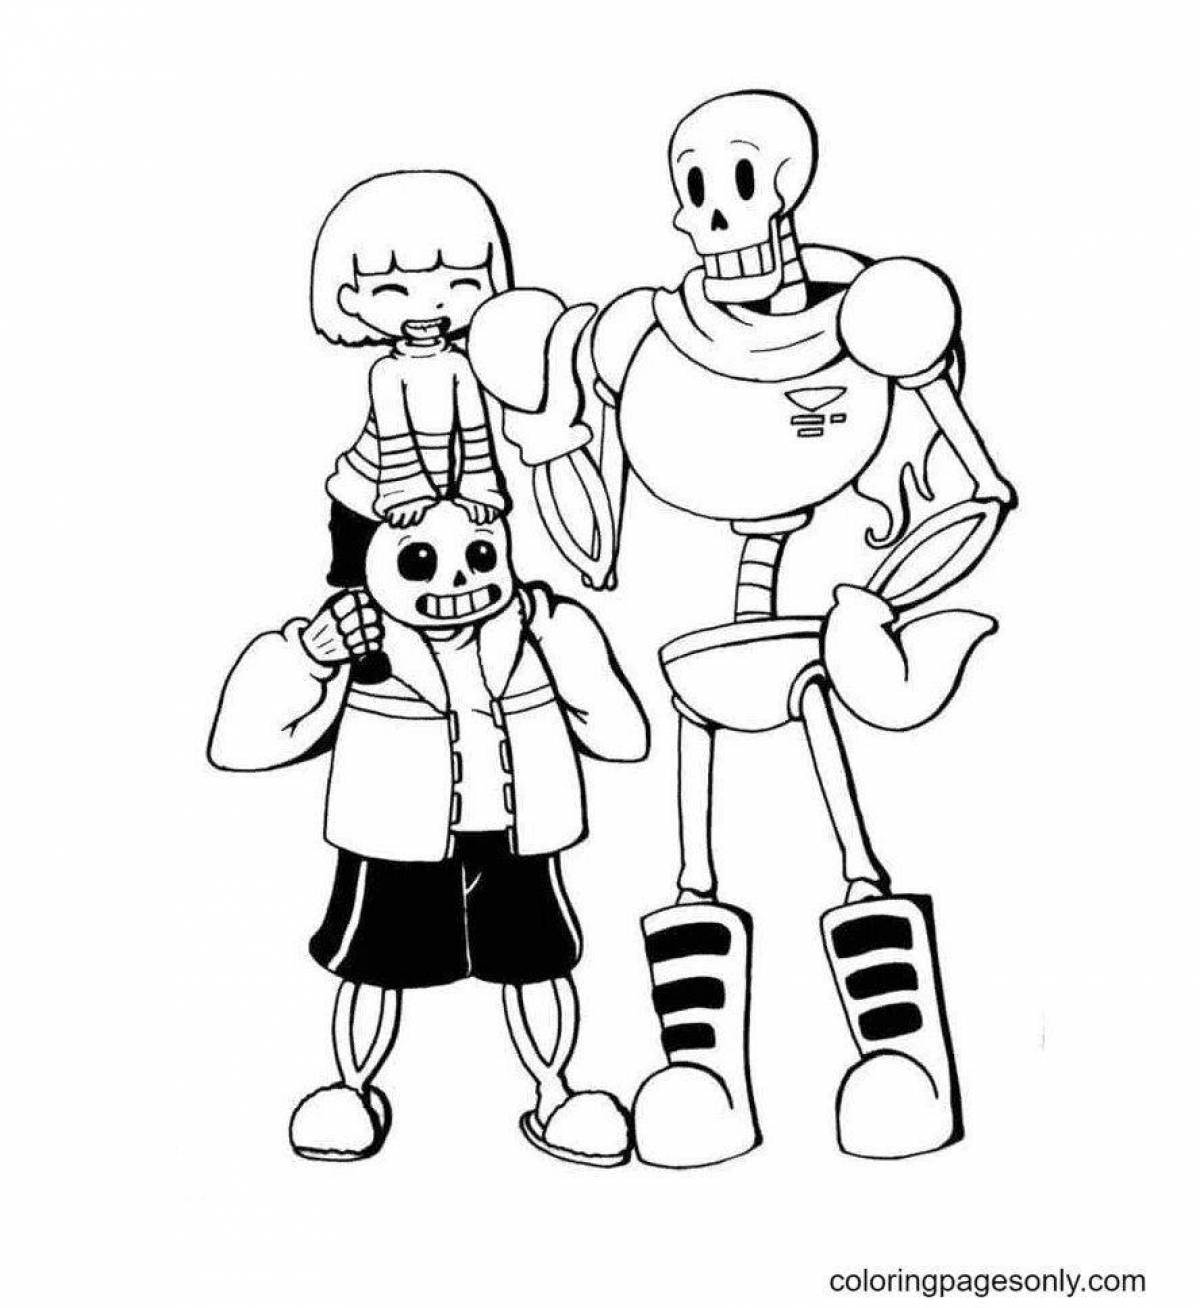 Glowing papyrus coloring page